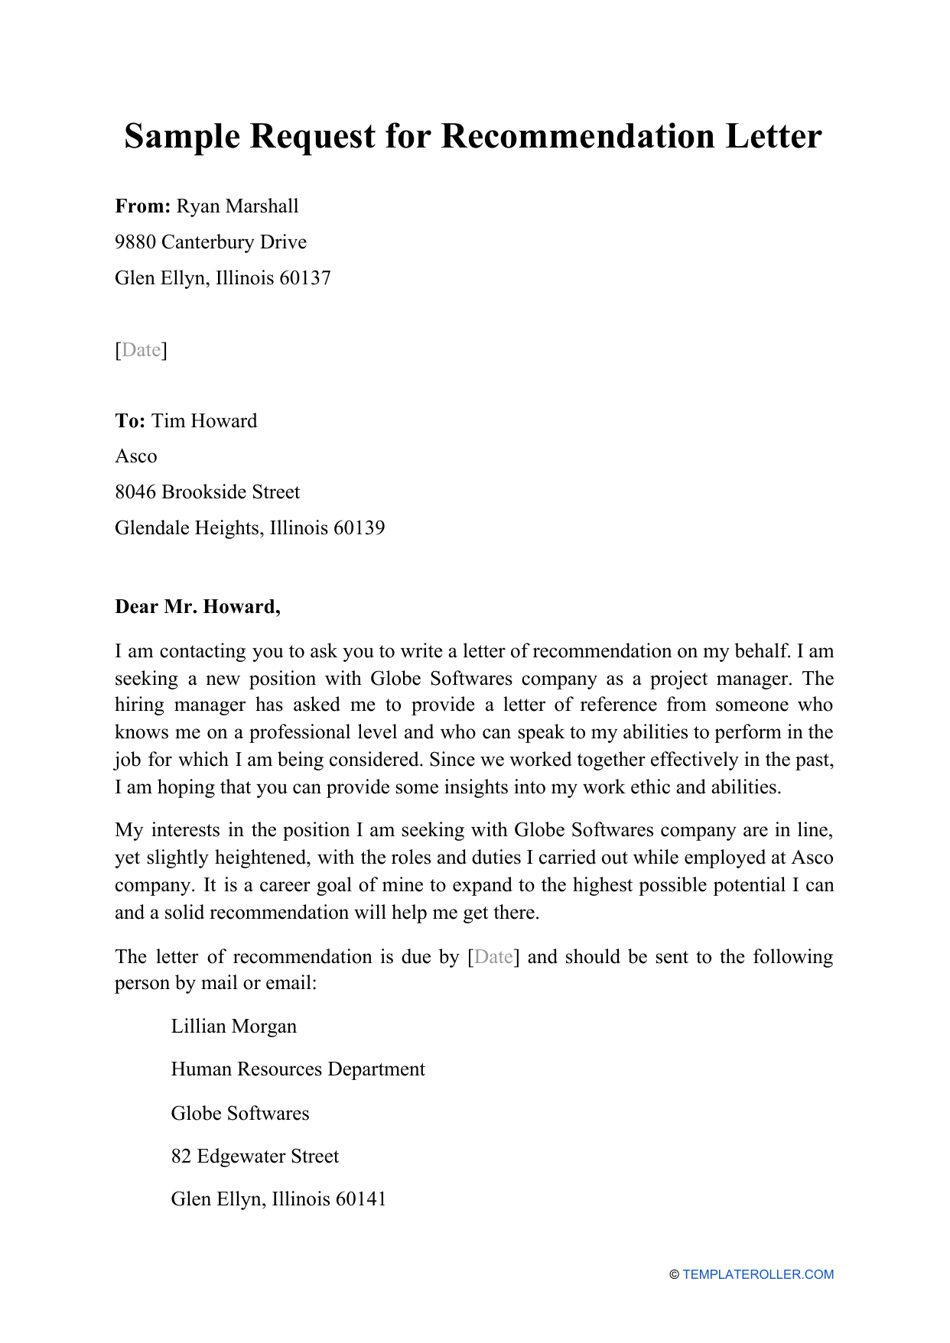 Request for Recommendation Letter - Template Preview